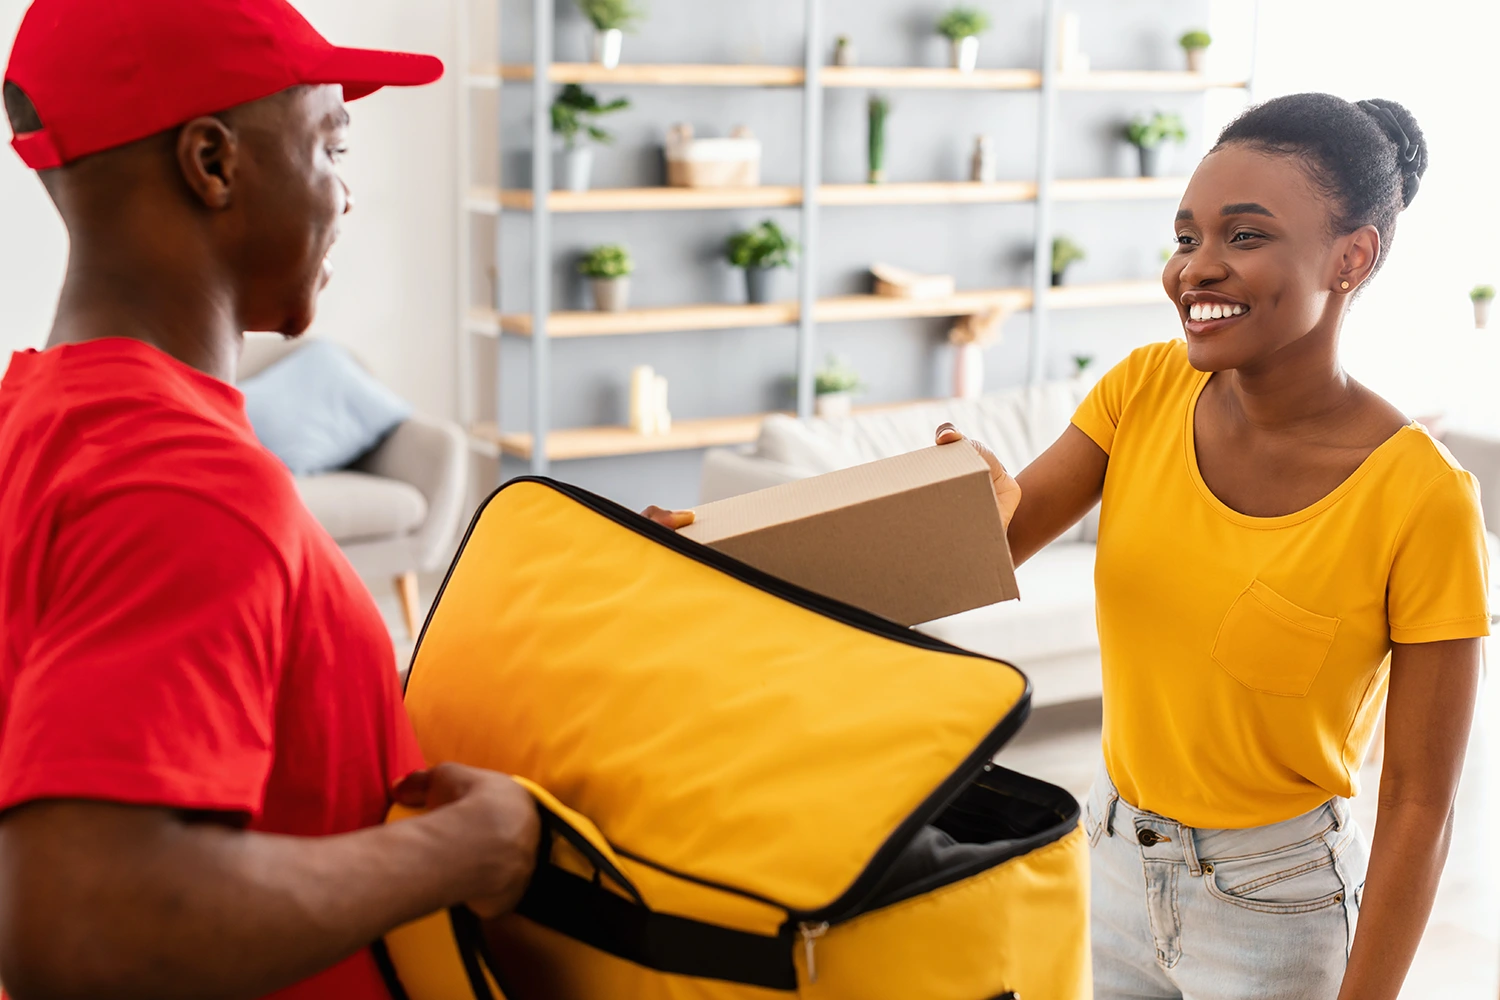 Giving guests the ability to order online and have food delivered opens restaurants to significantly more revenue. In this image, a smiling delivery driver hands a delivery to a consumer.